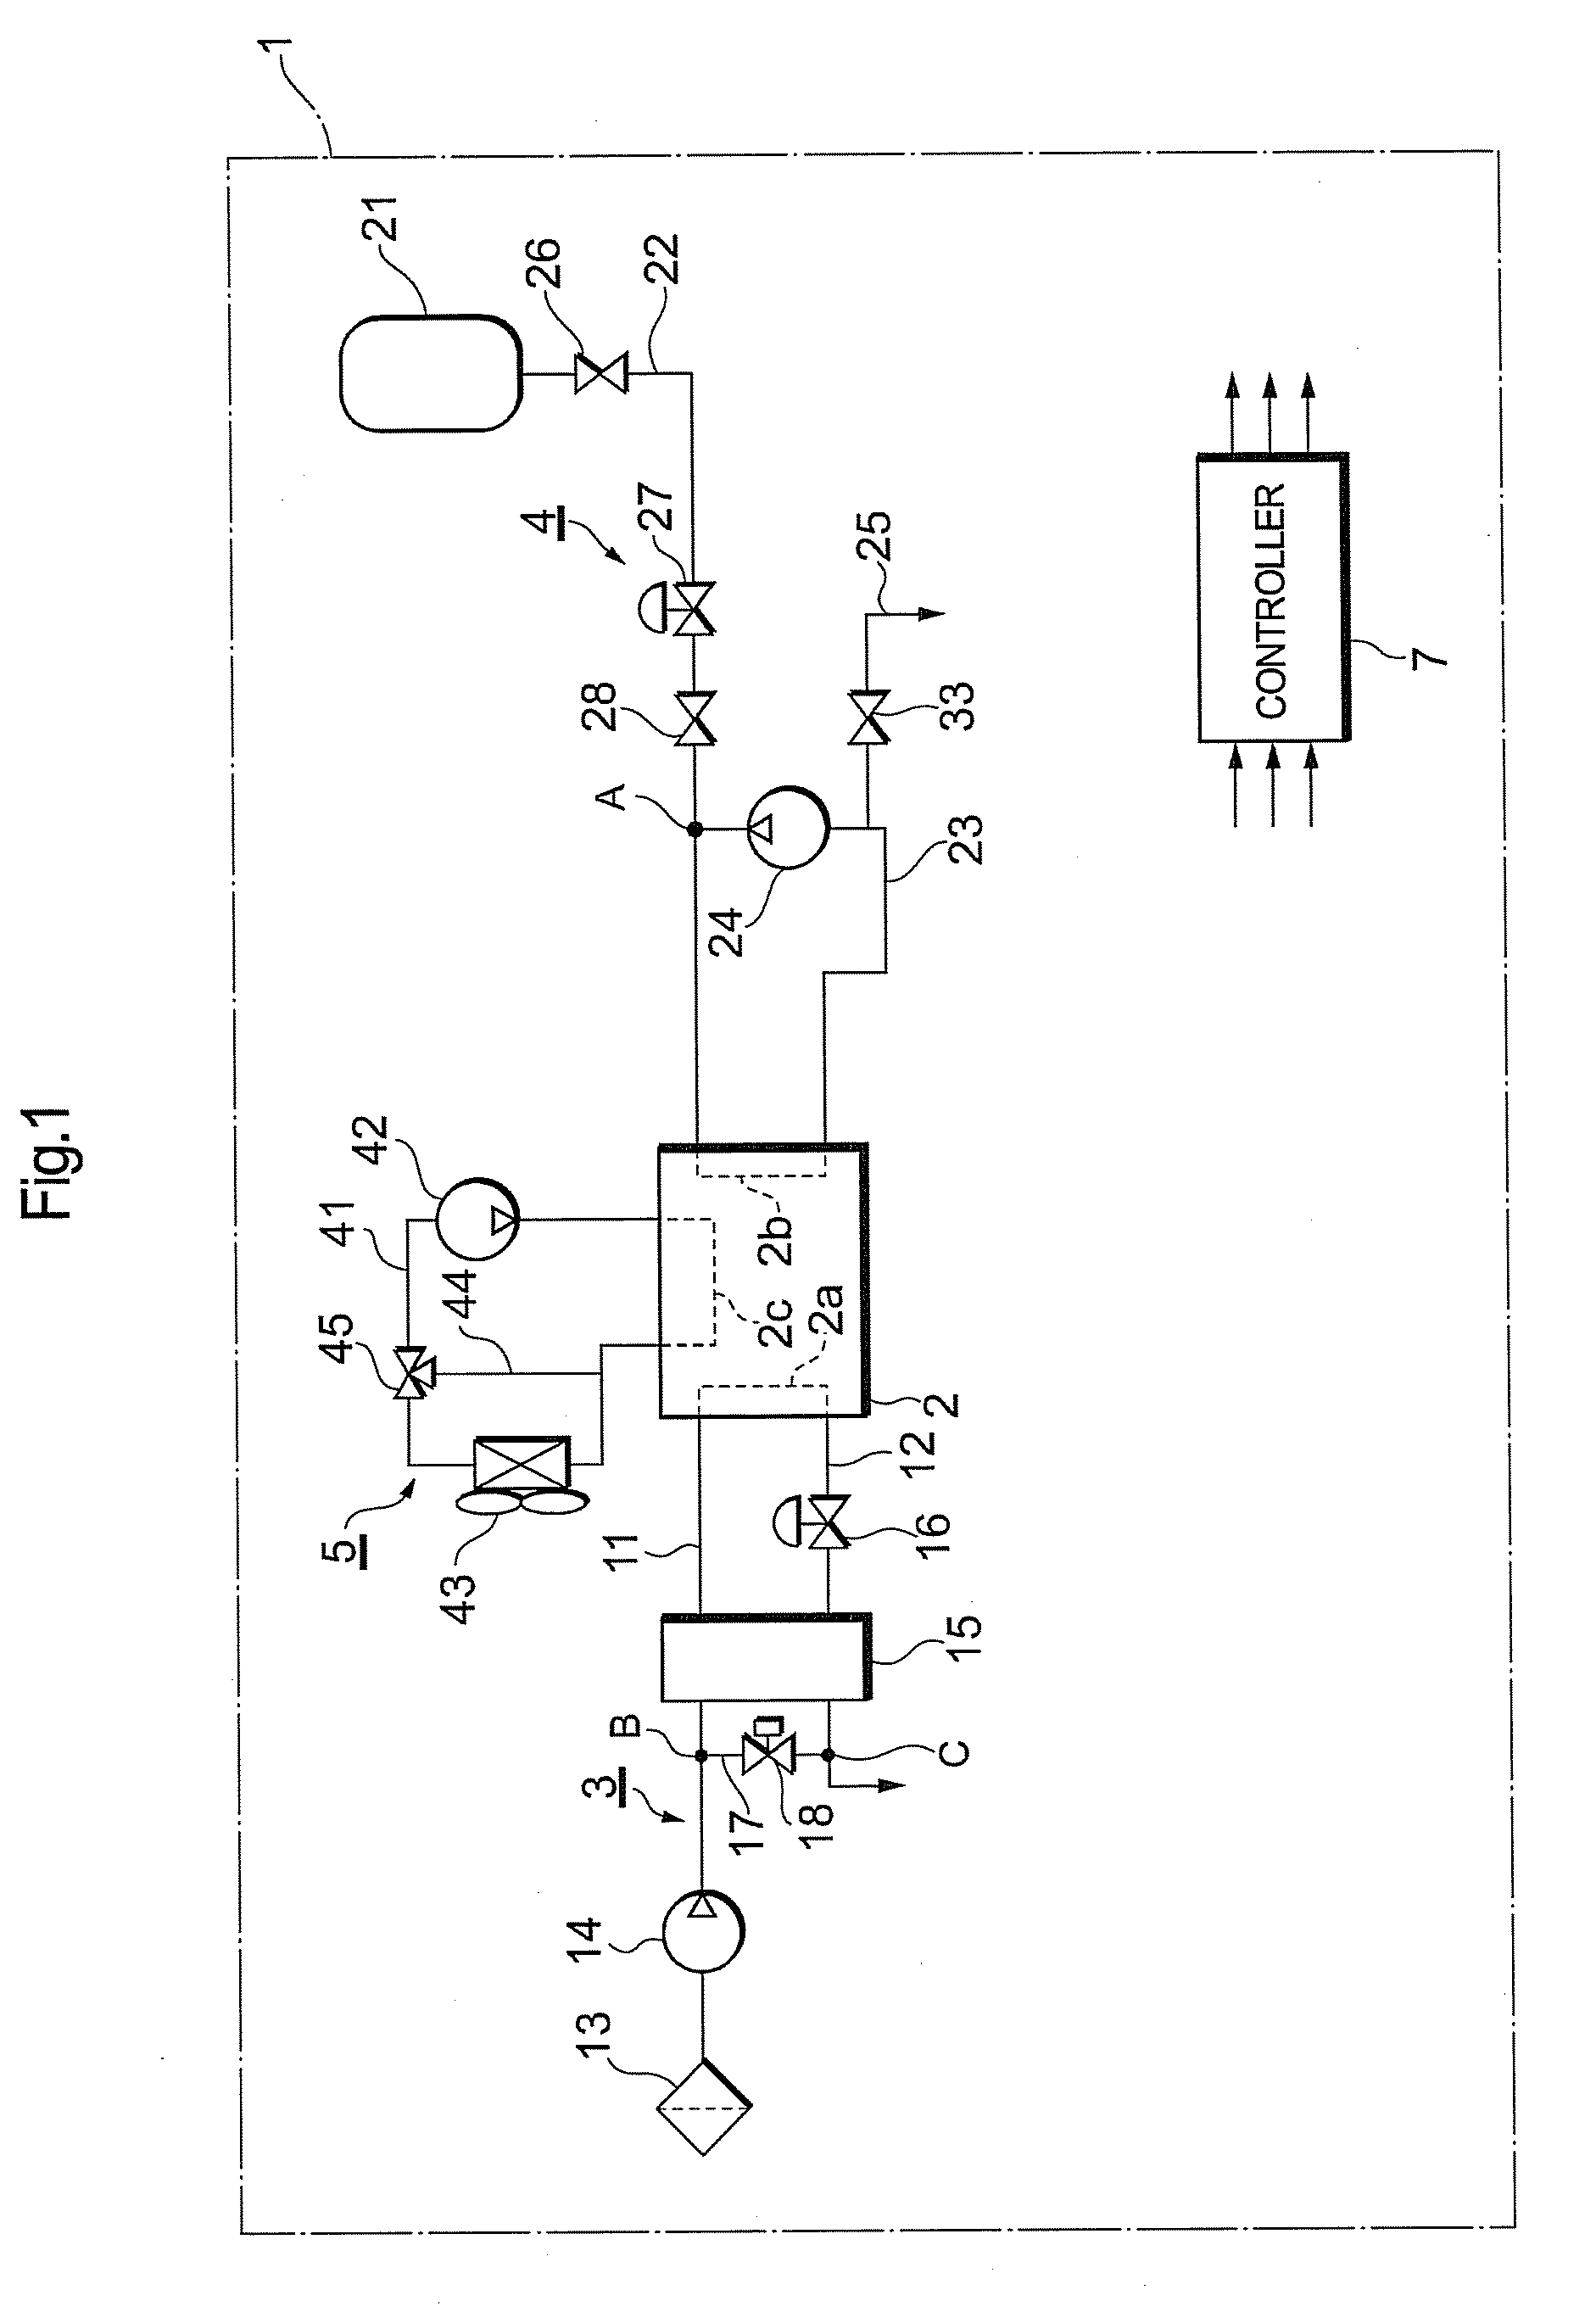 Humidifier and fuel cell system